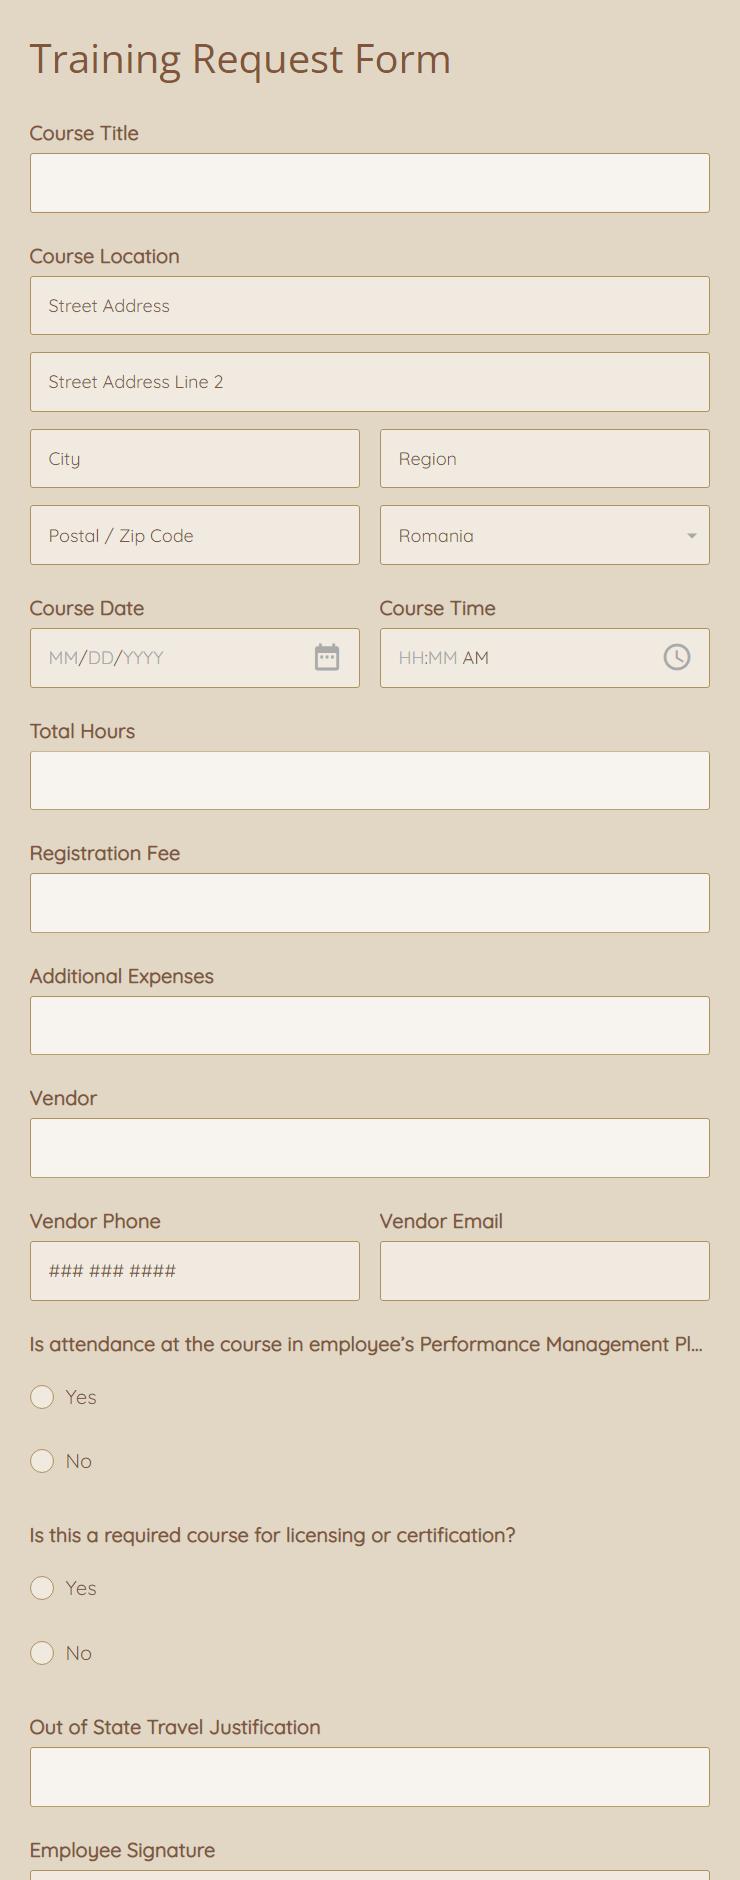 Training Request Form Template 123FormBuilder